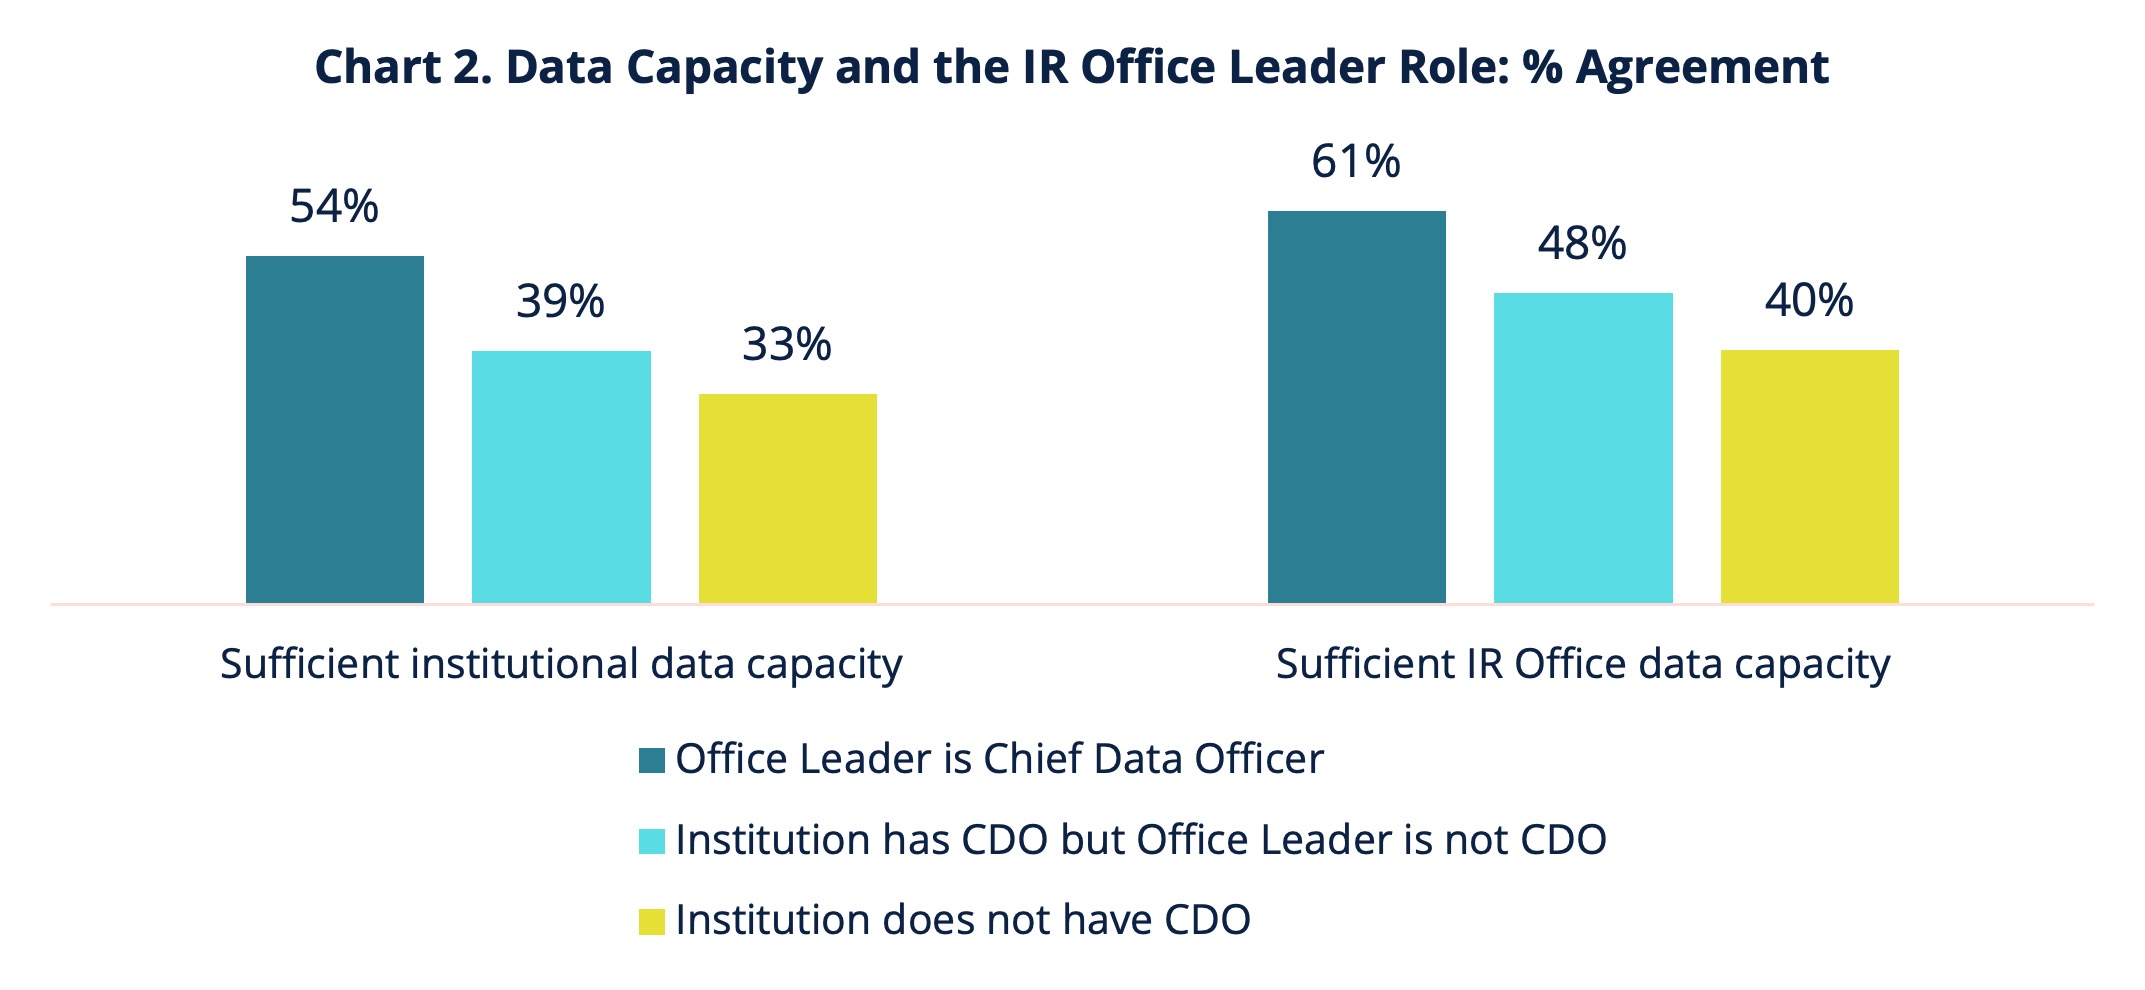 Chart 2. Data Capacity and the IR Office Leader Role: % Agreement
